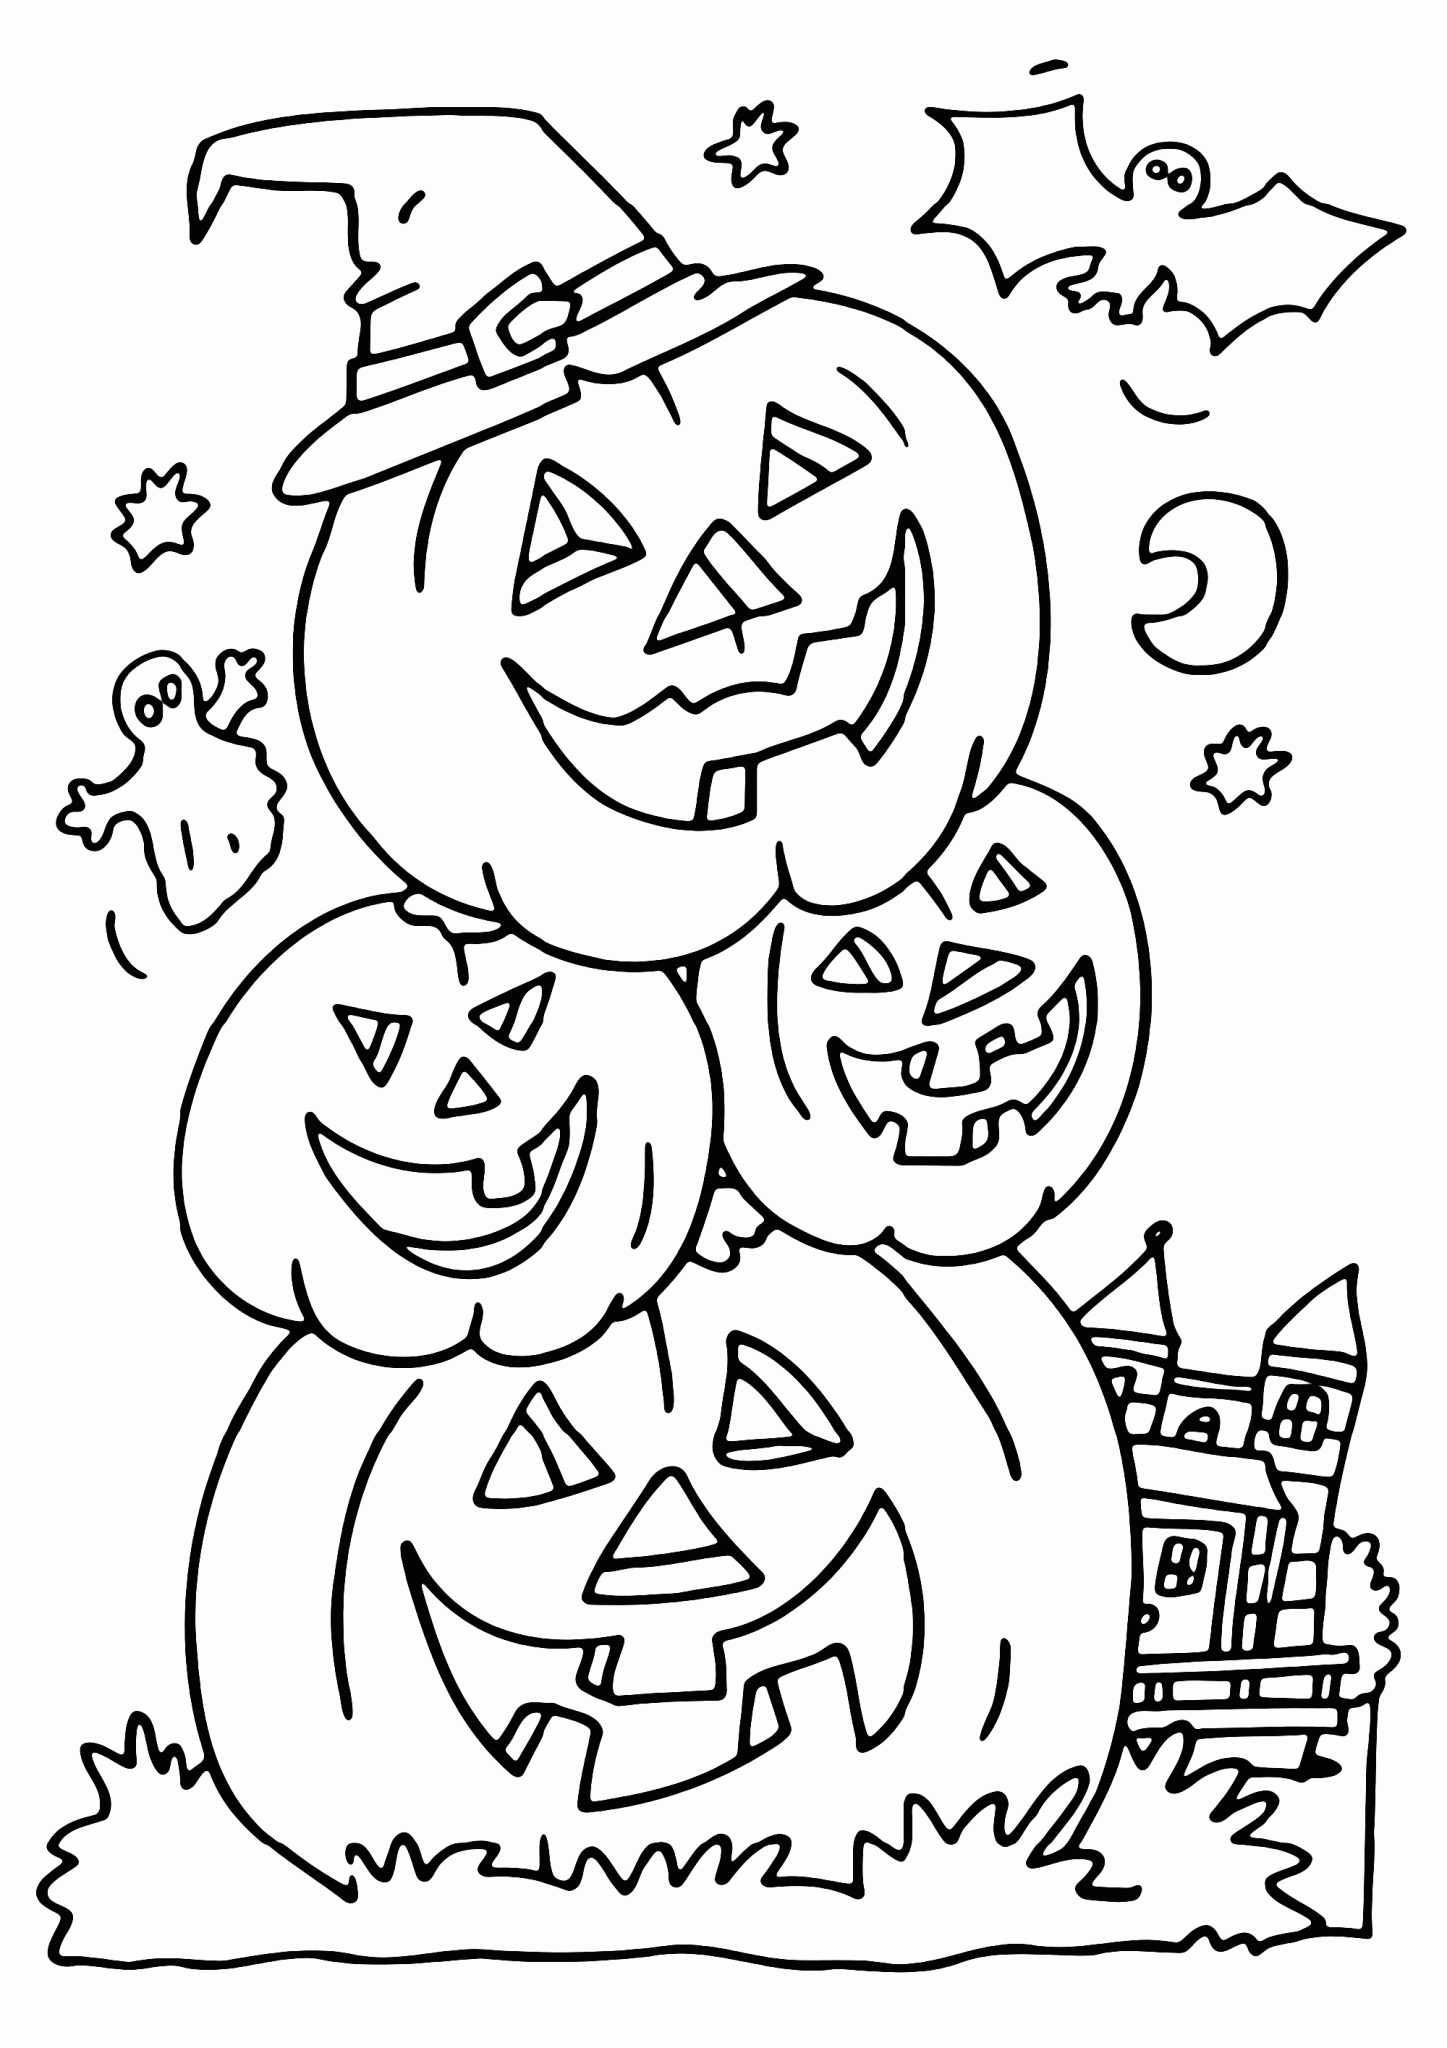 ghost-pumpkin-happy-halloween-coloring-pages-coloring-pages